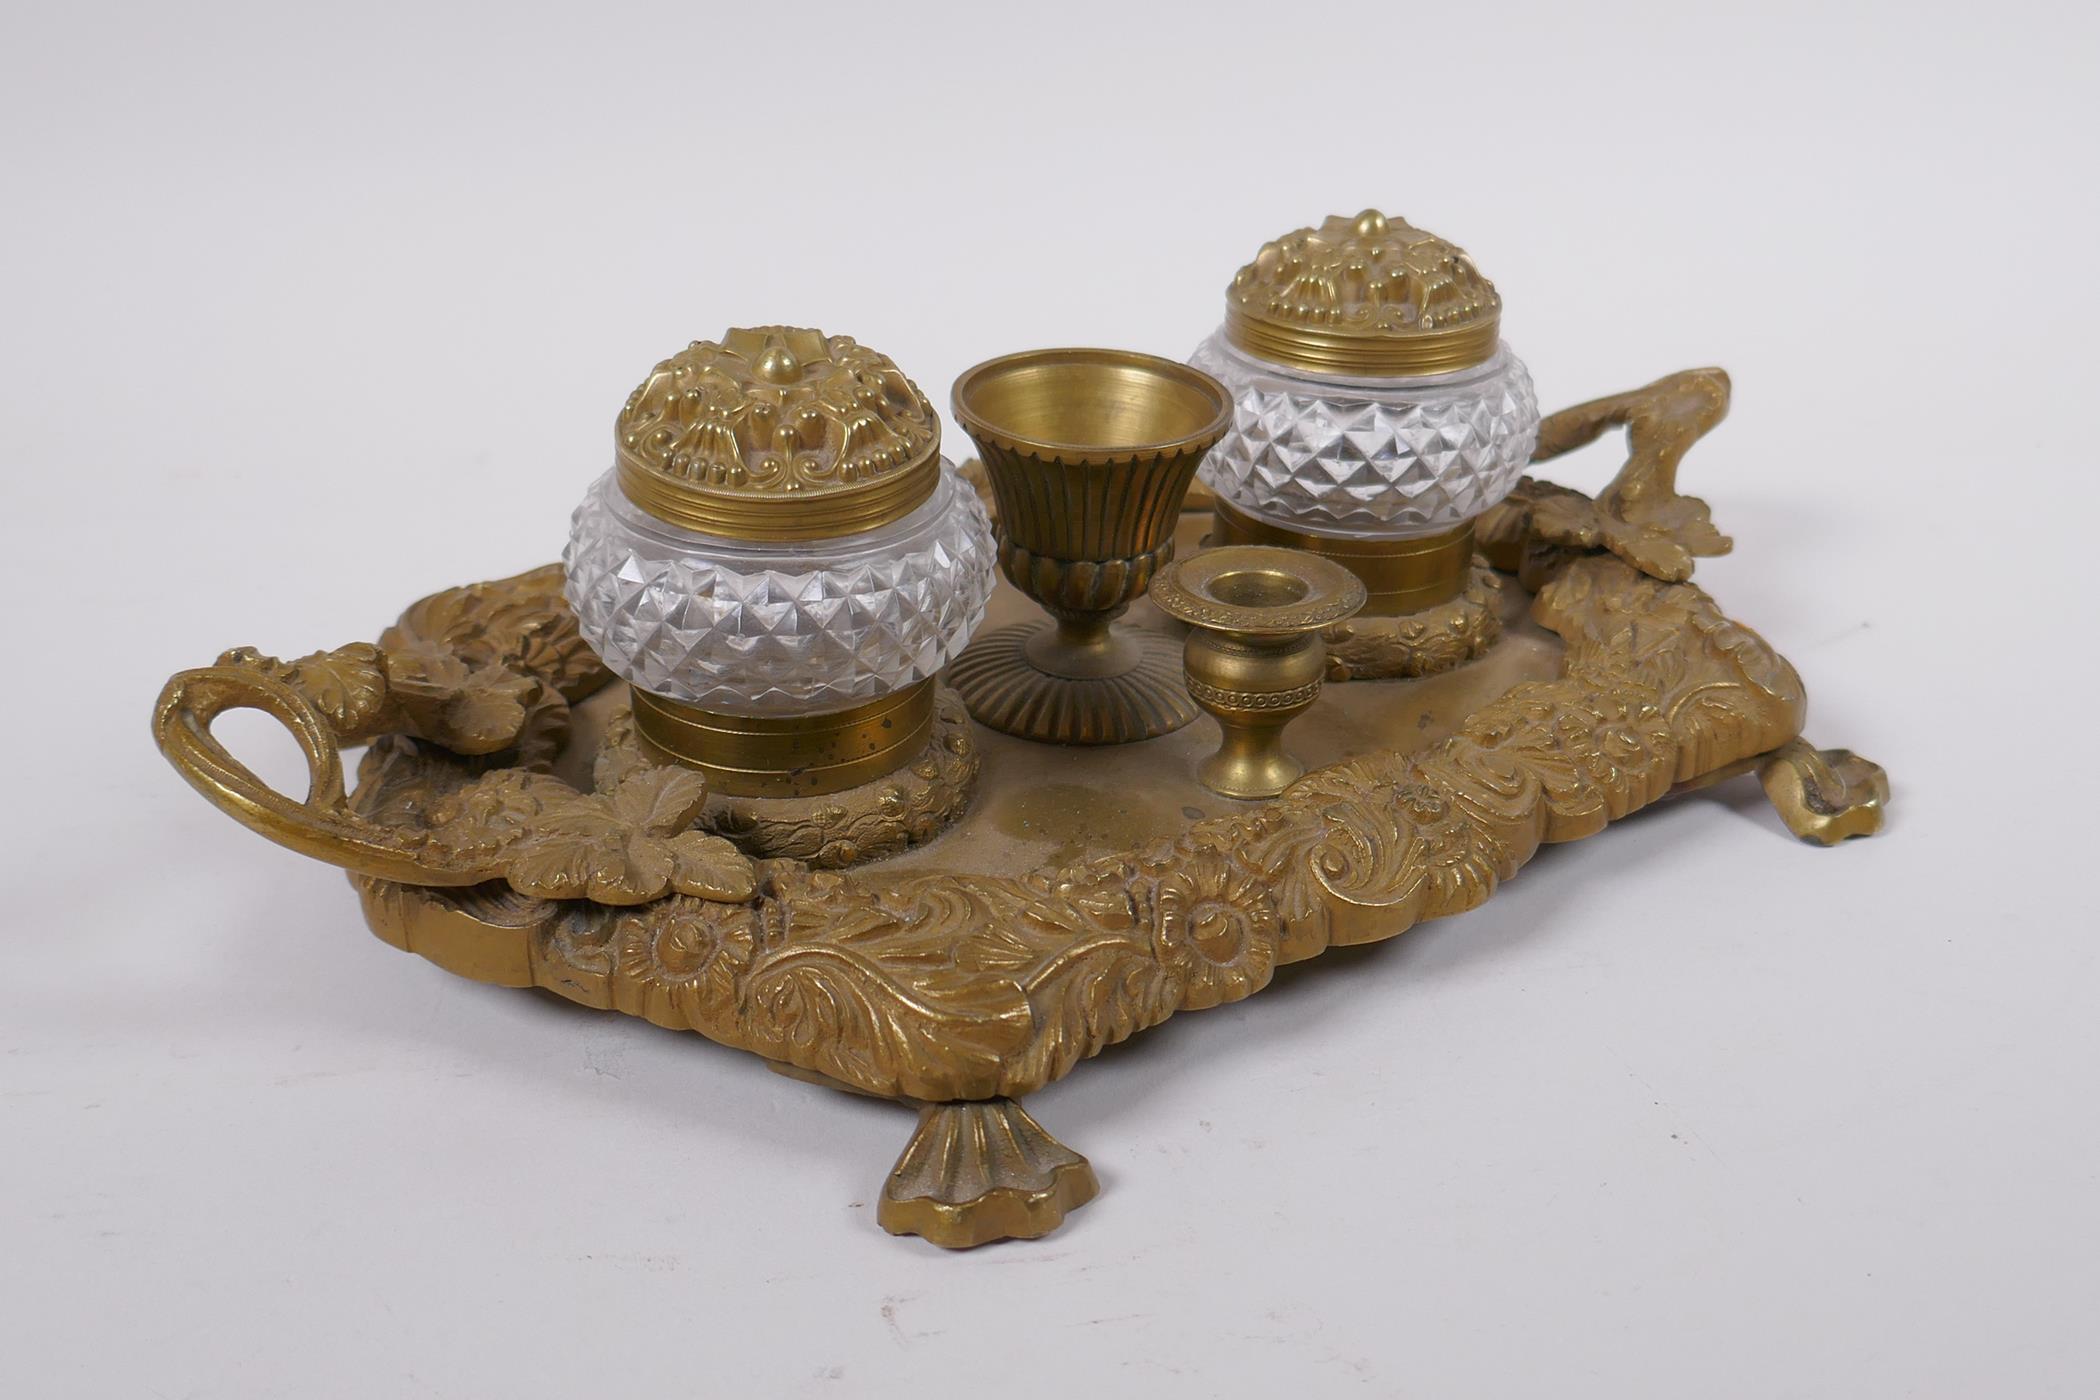 An antique brass desk stand with raised vine decoration and two glass inkwells, 30 x 20cm - Image 3 of 3